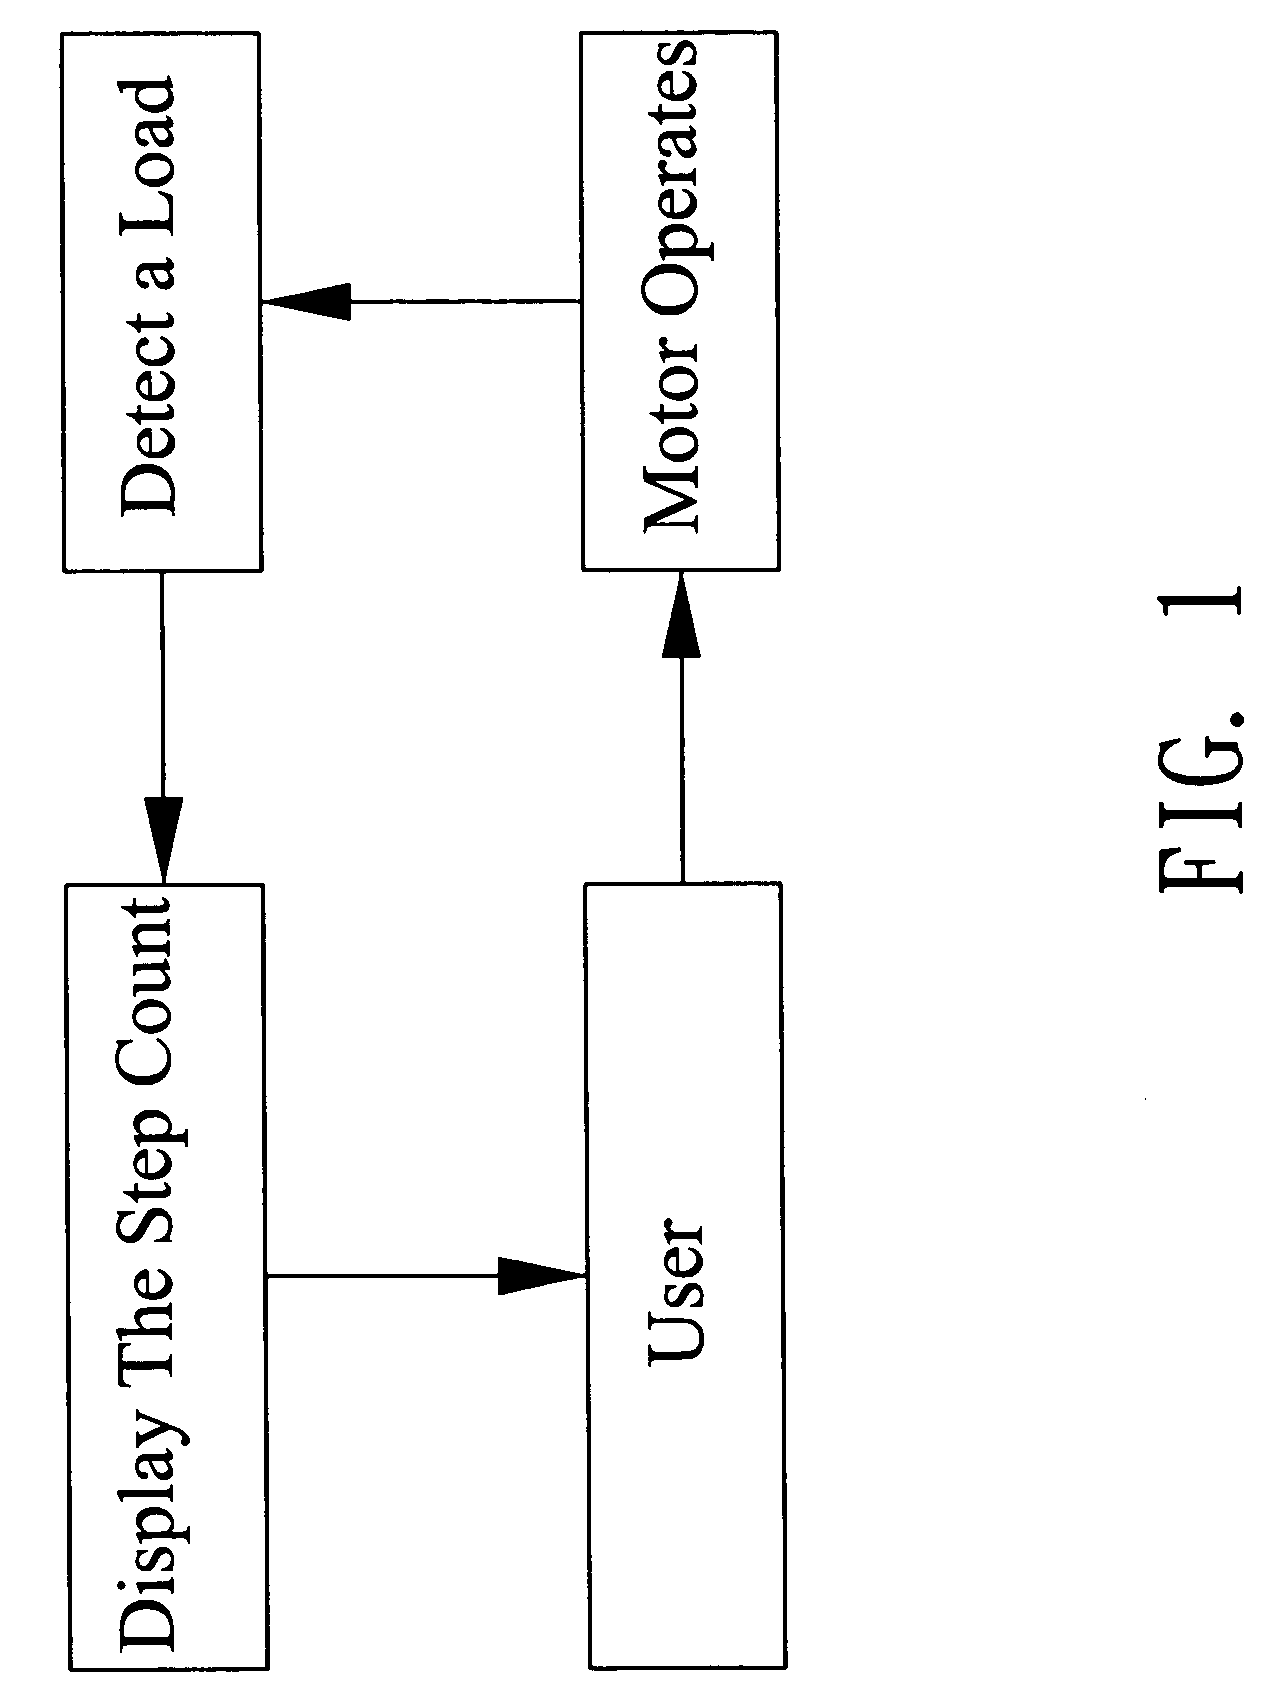 Method and apparatus of counting steps for treadmill